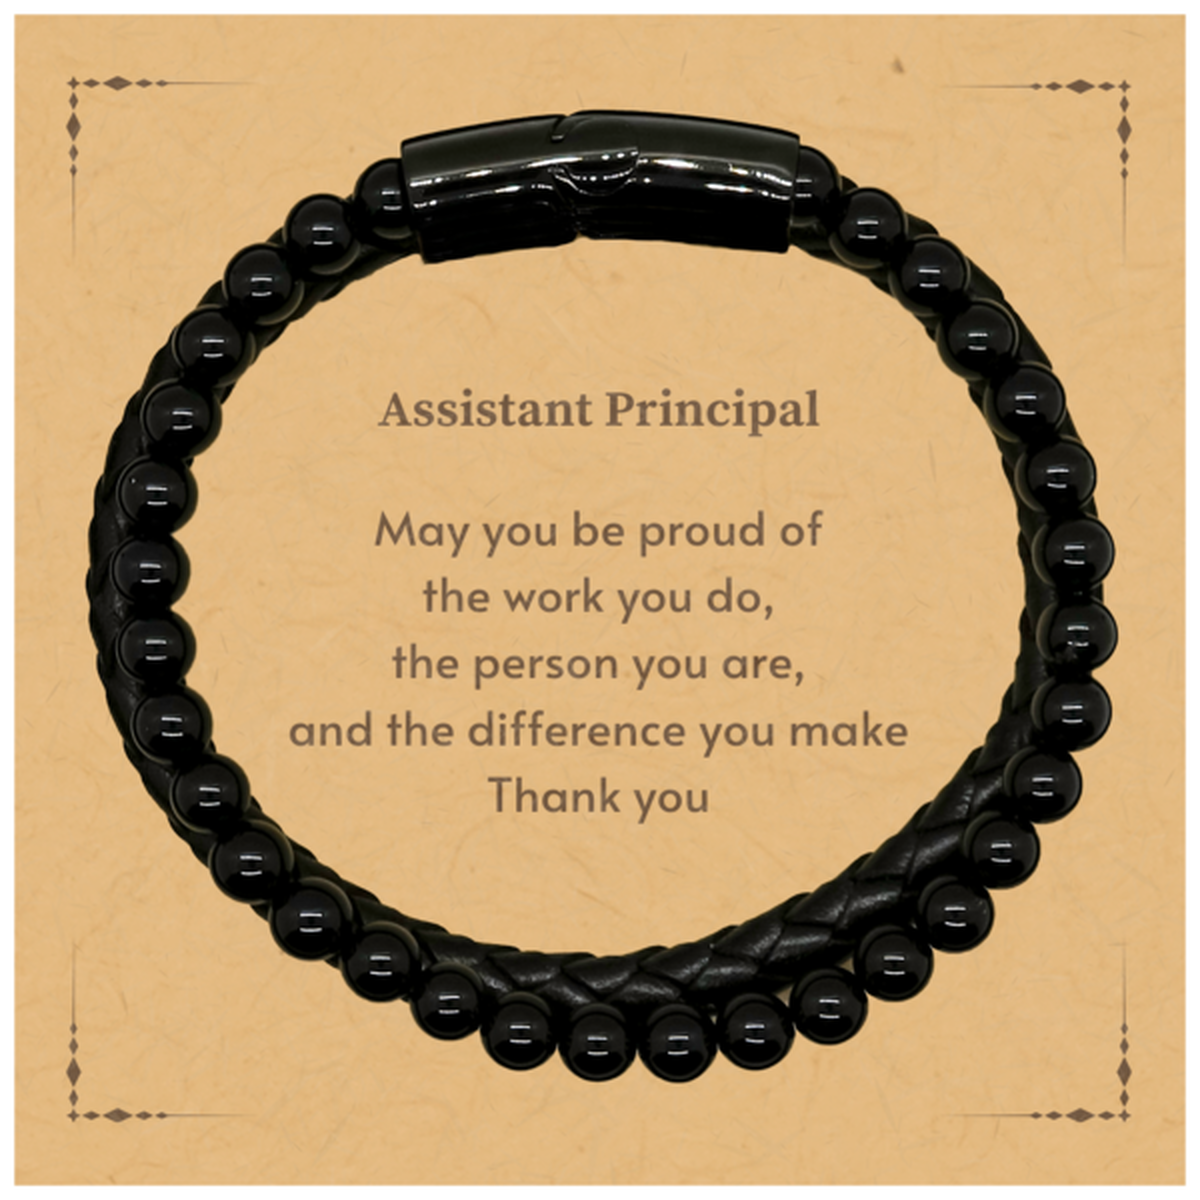 Heartwarming Stone Leather Bracelets Retirement Coworkers Gifts for Assistant Principal, Assistant Principal May You be proud of the work you do, the person you are Gifts for Boss Men Women Friends